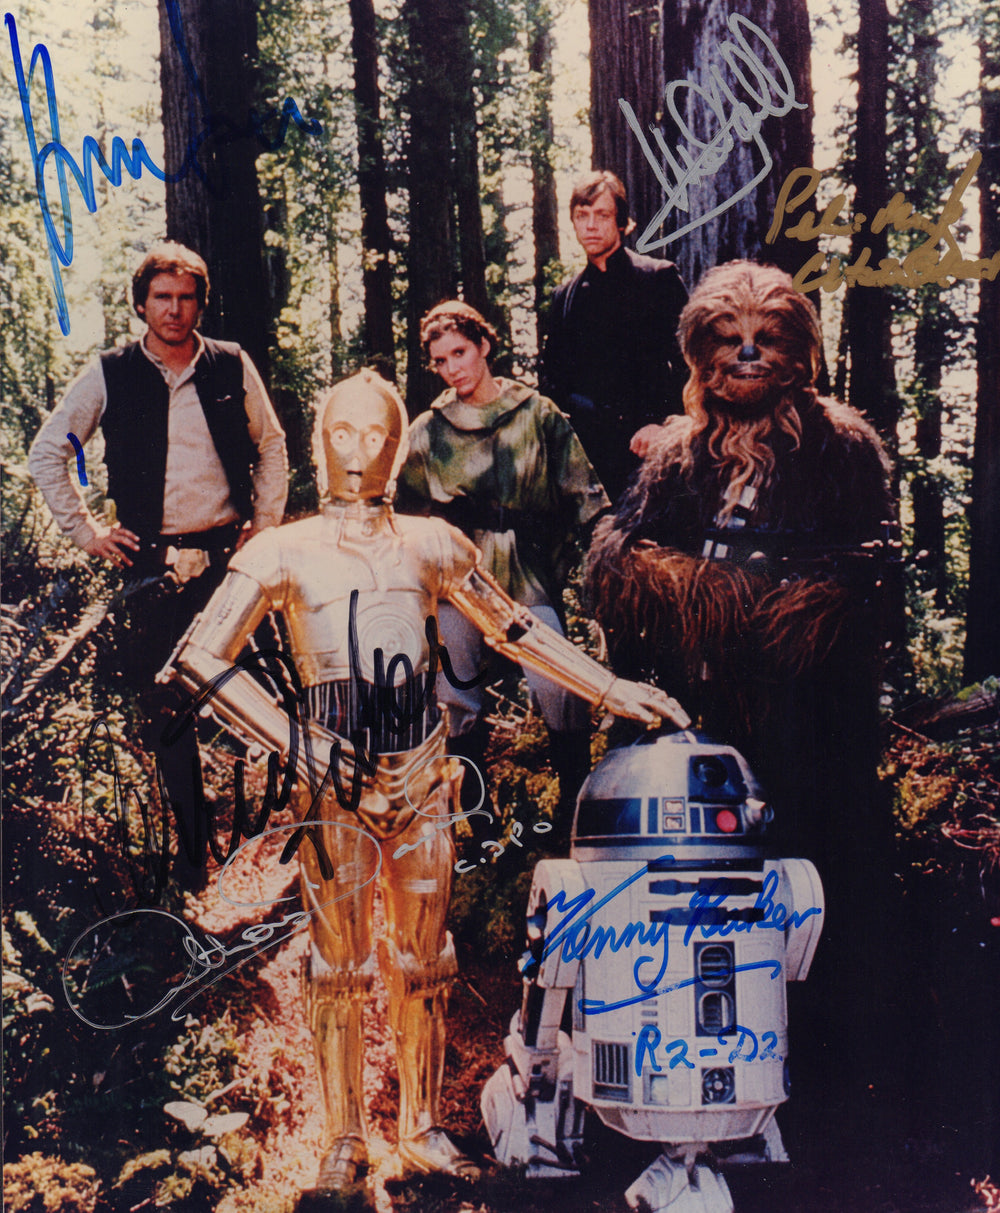 Star Wars: Return of the Jedi Main Cast Vintage Signed 8x10 Photo - Harrison Ford, Mark Hamill, Carrie Fisher, Anthony Daniels, Kenny Baker, & Peter Mayhew